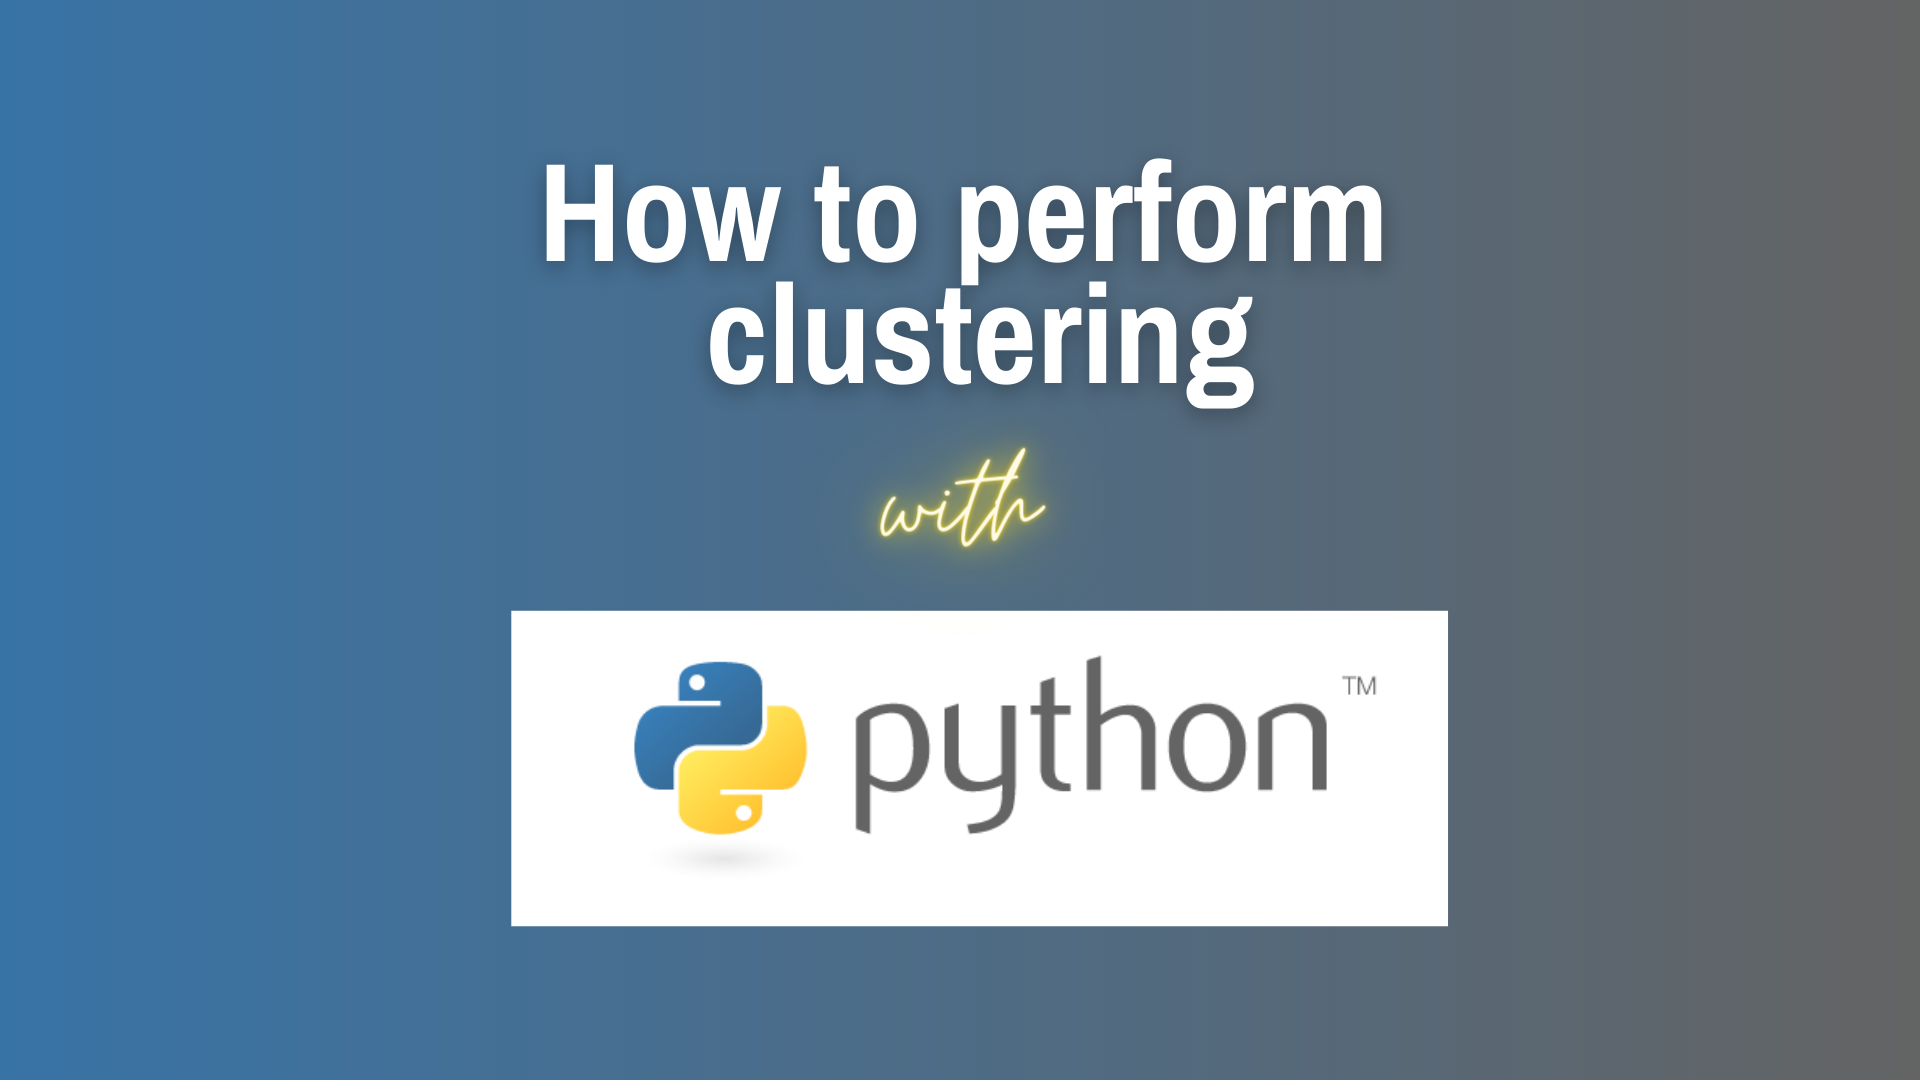 How to perform clusteringf with Python, with the python logo on a blended blue and grey background